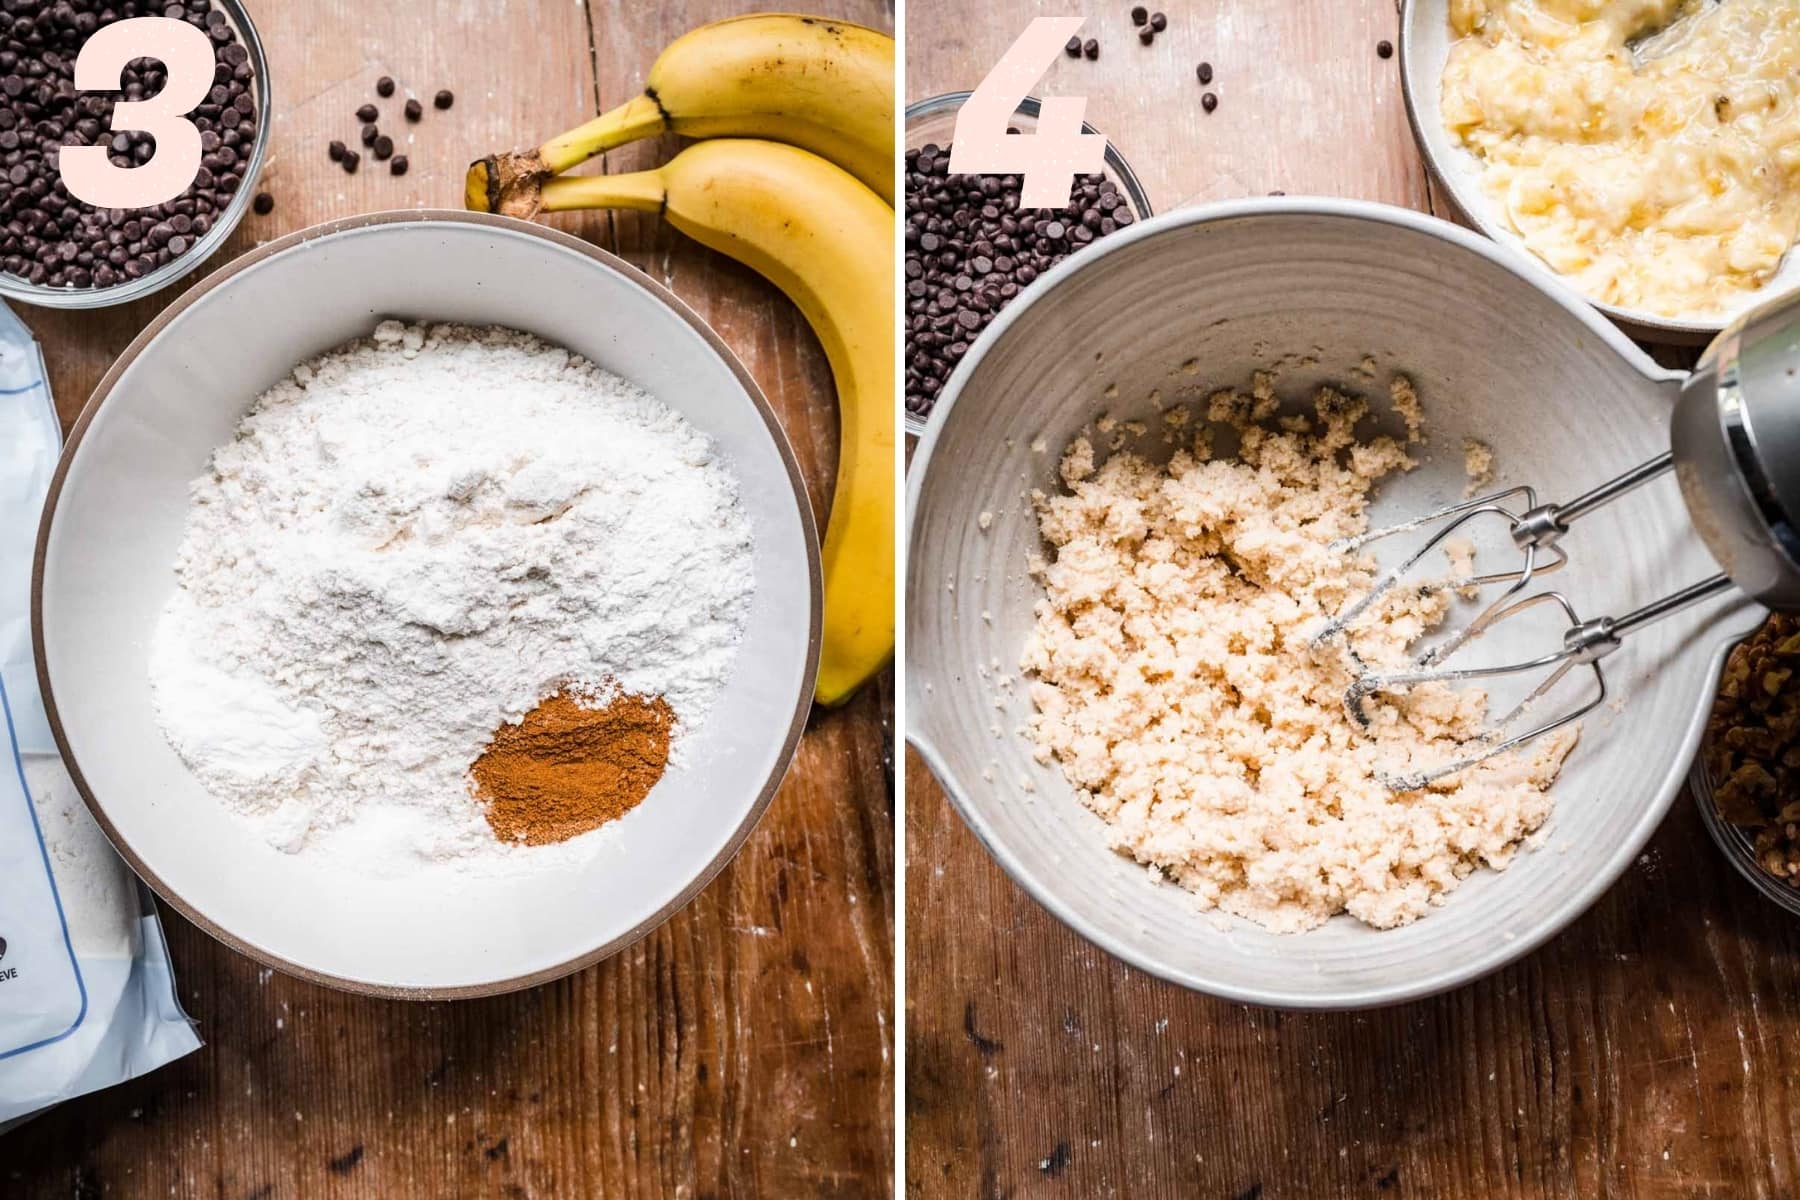 On the left: dry ingredients in a bowl together. On the right: butter and sugar being creamed.